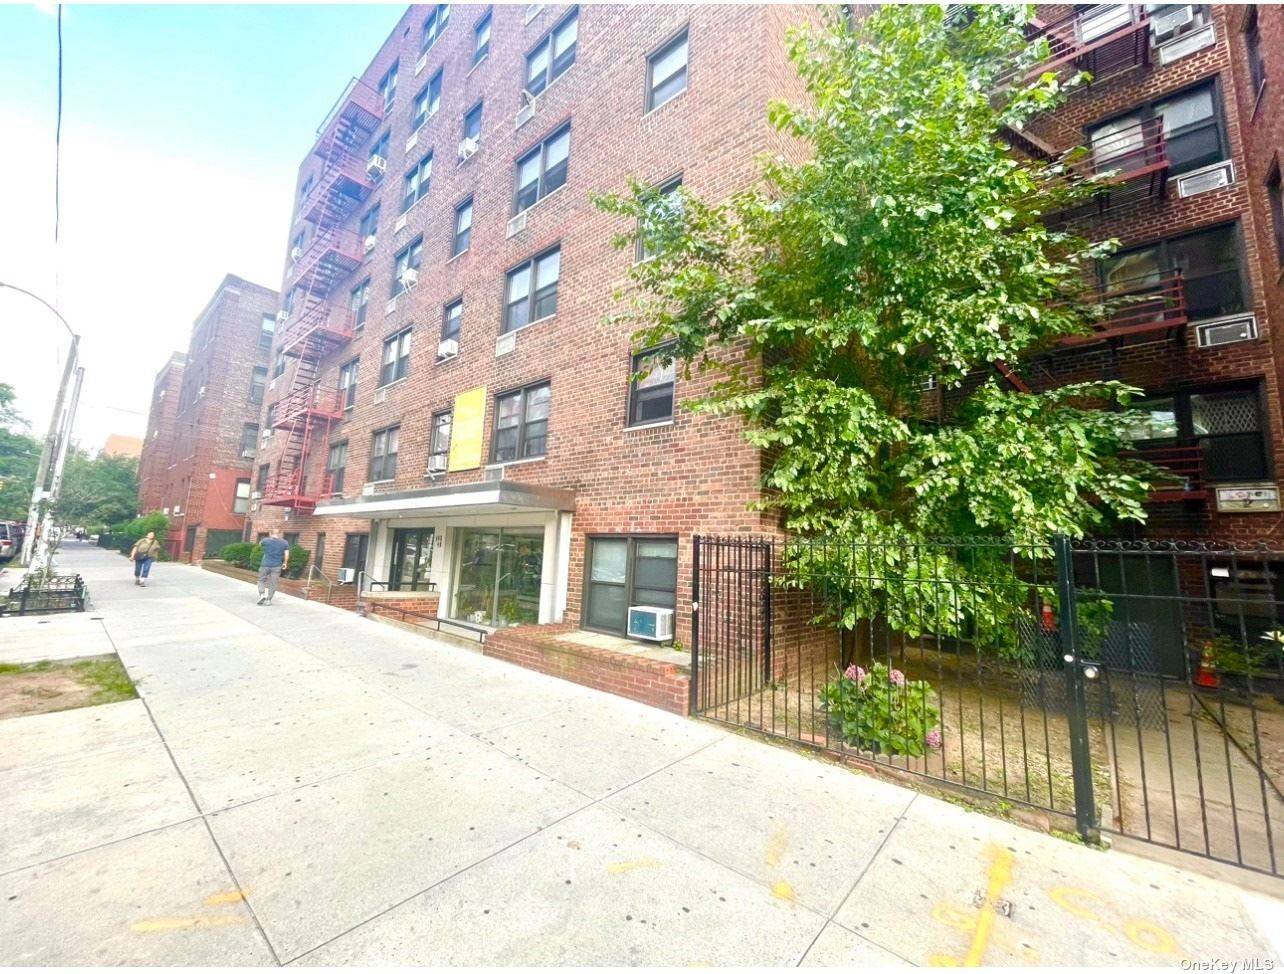 This is is great opportunity to own a one bedroom co op in center of flushing, H MART super market just steps away, walkable distance to 7 train Main street ...